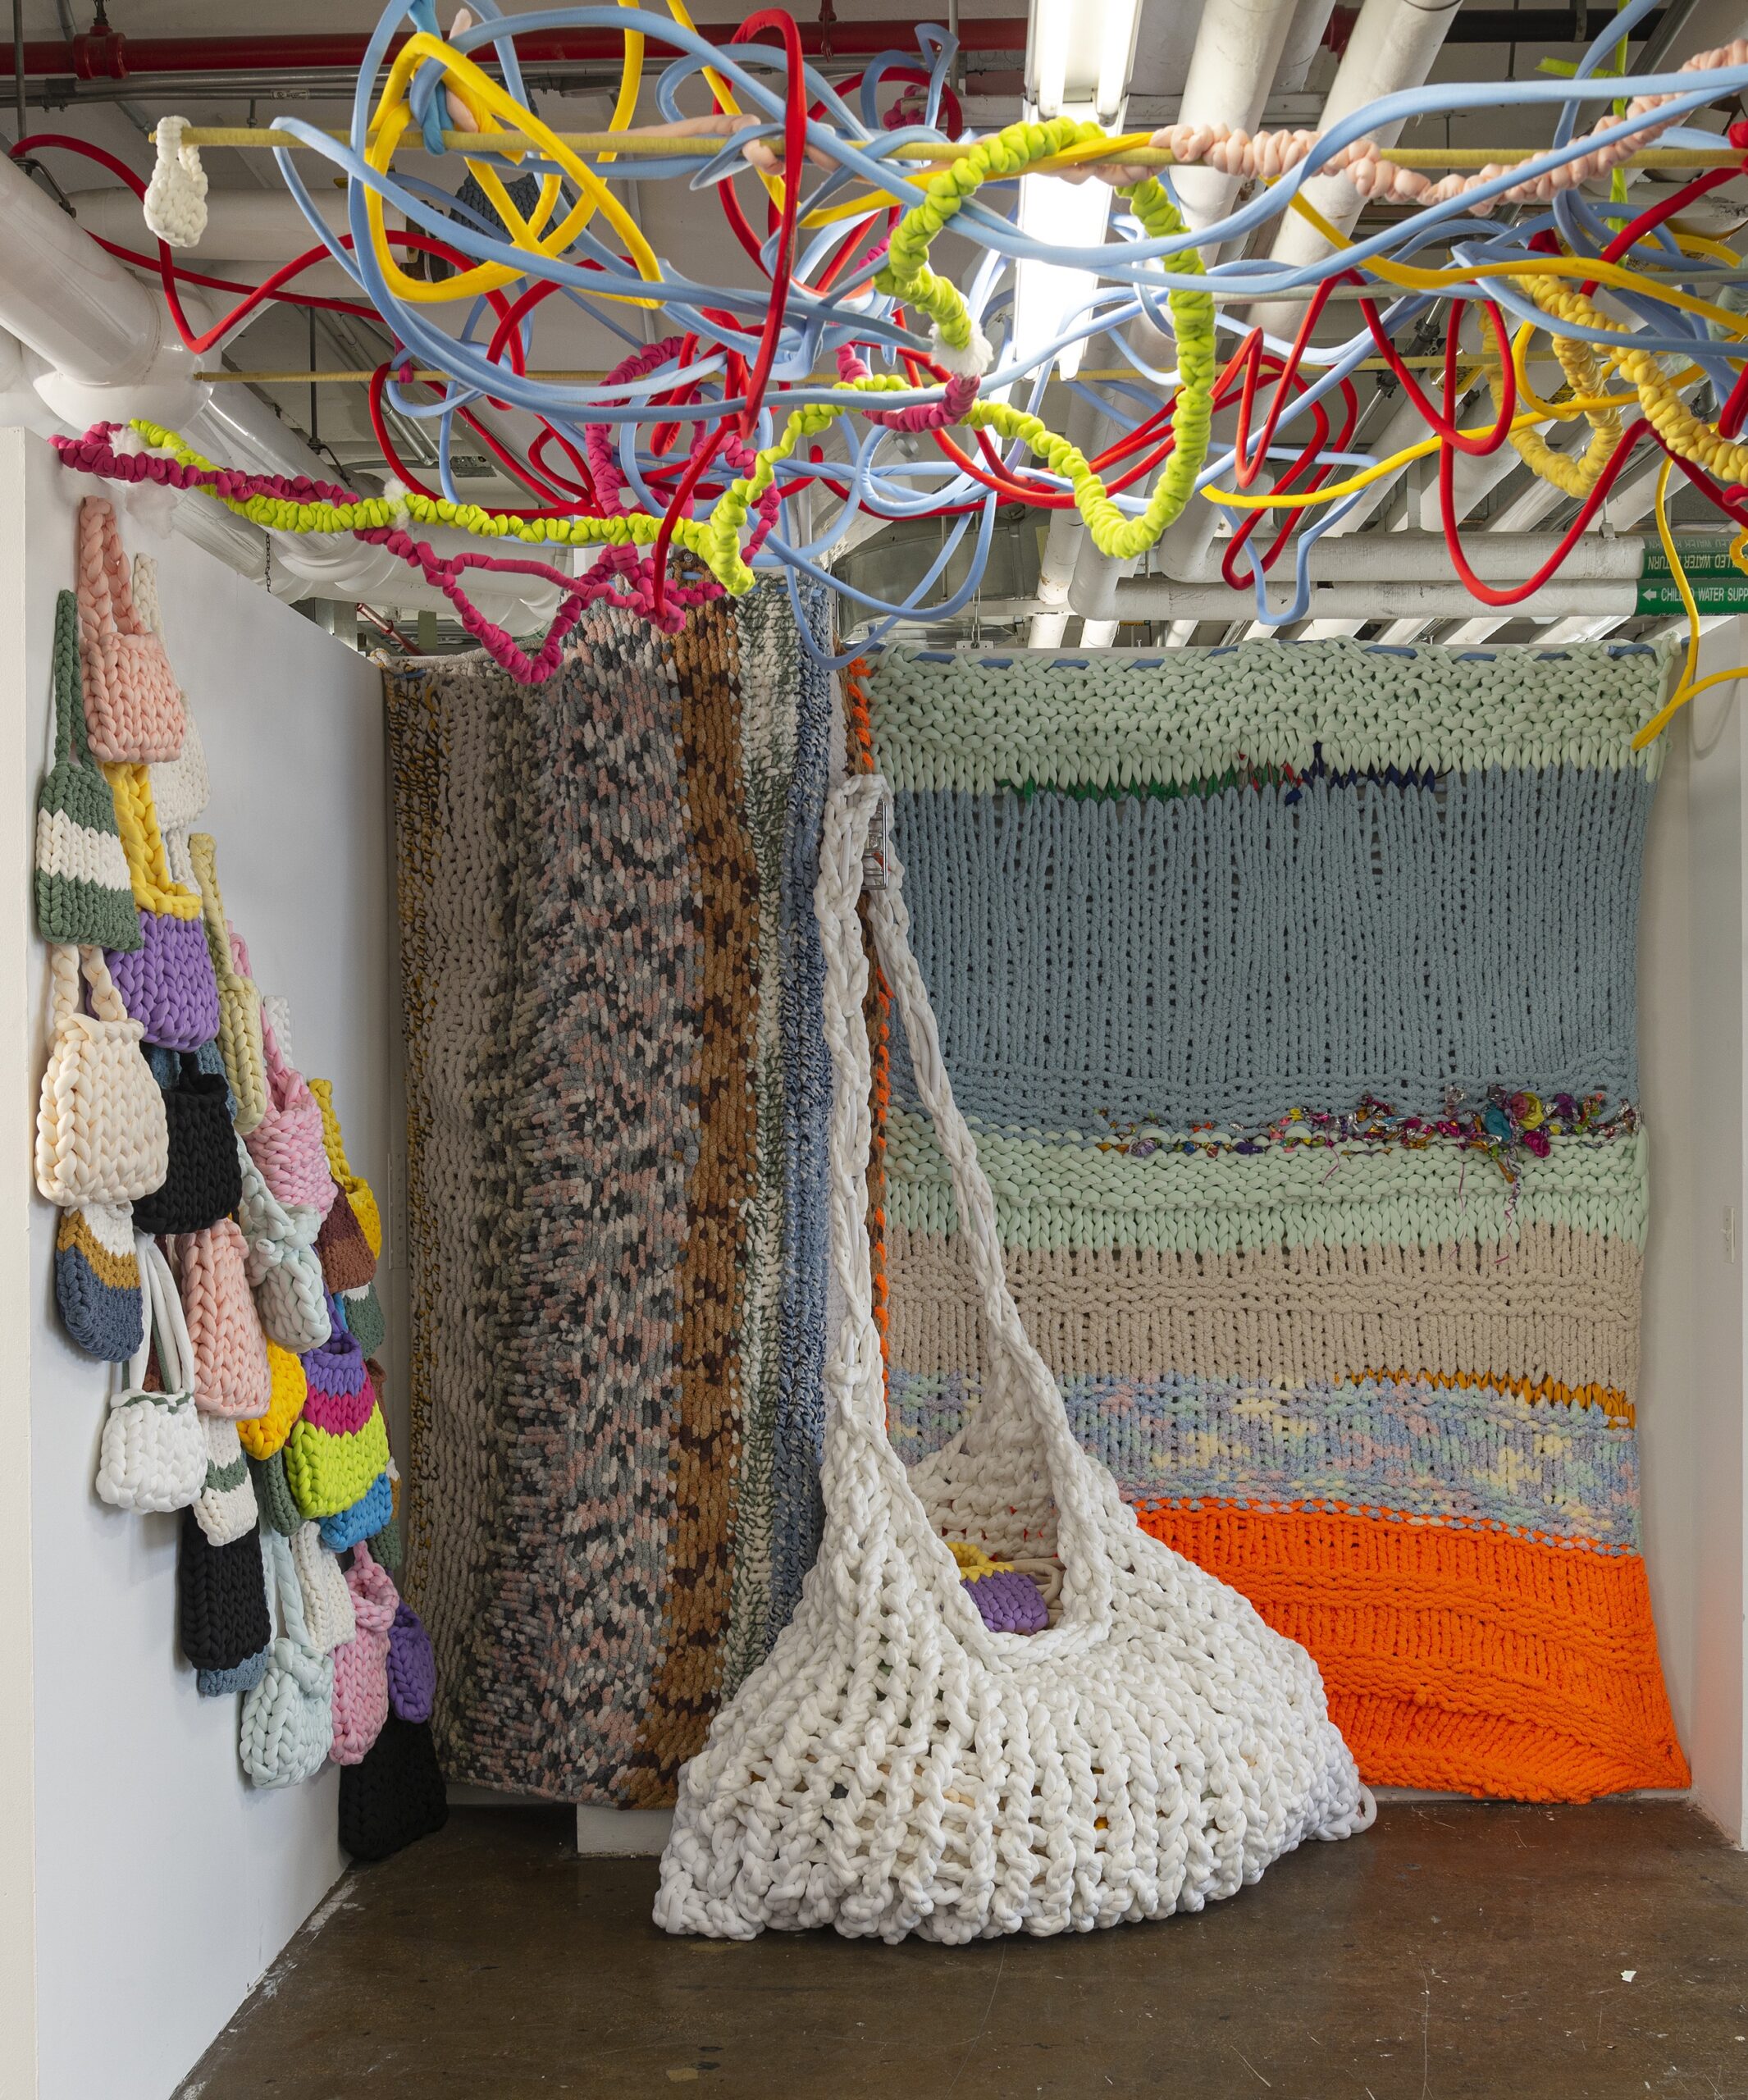 installation consisting of bags sown with large string